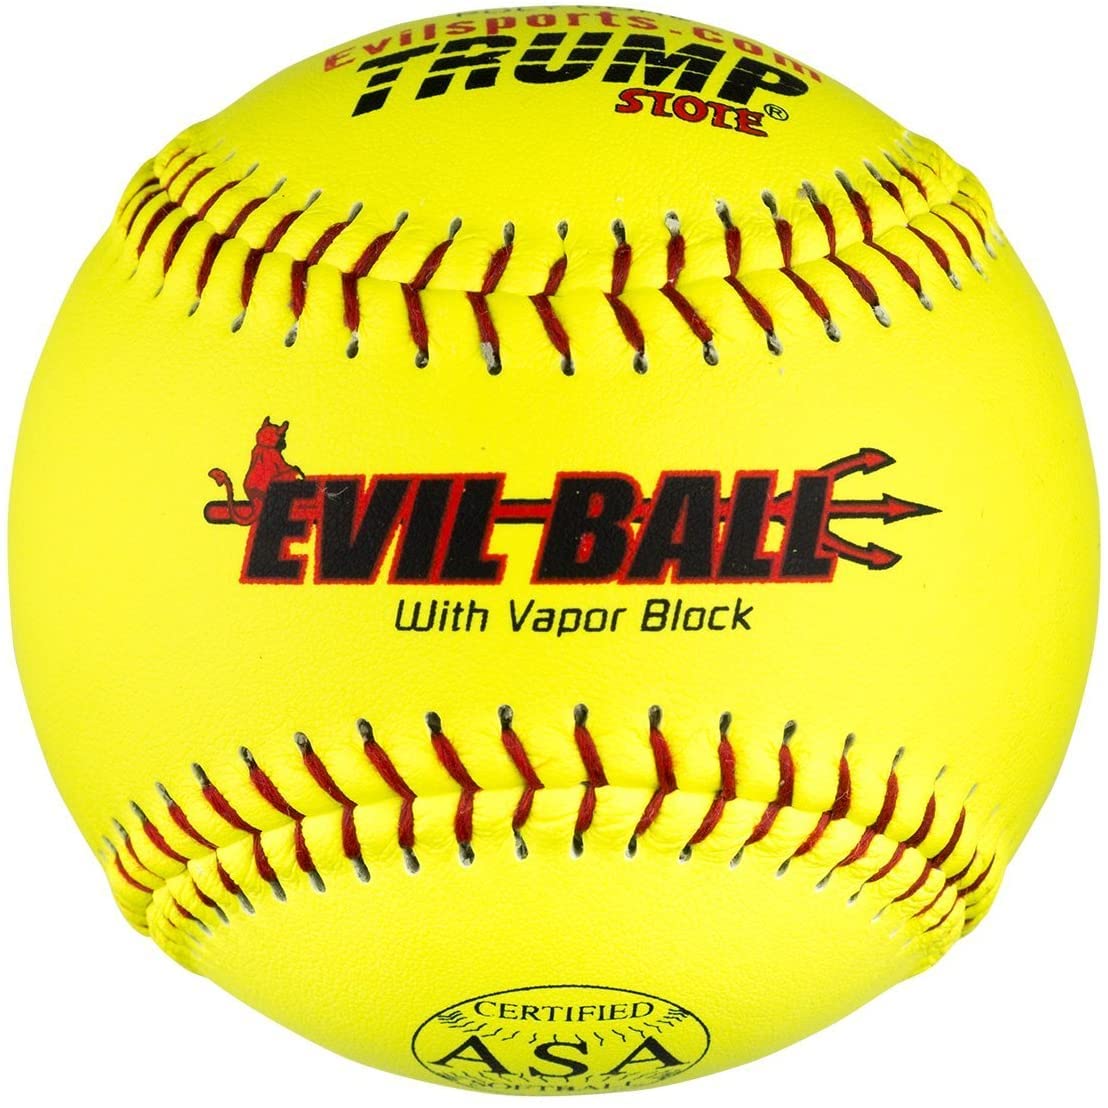 Evil Ball ASA 44-375 HOT Leather Cover 44 core 375 Compression Softball, 12-Inch Comp, Pack of 12